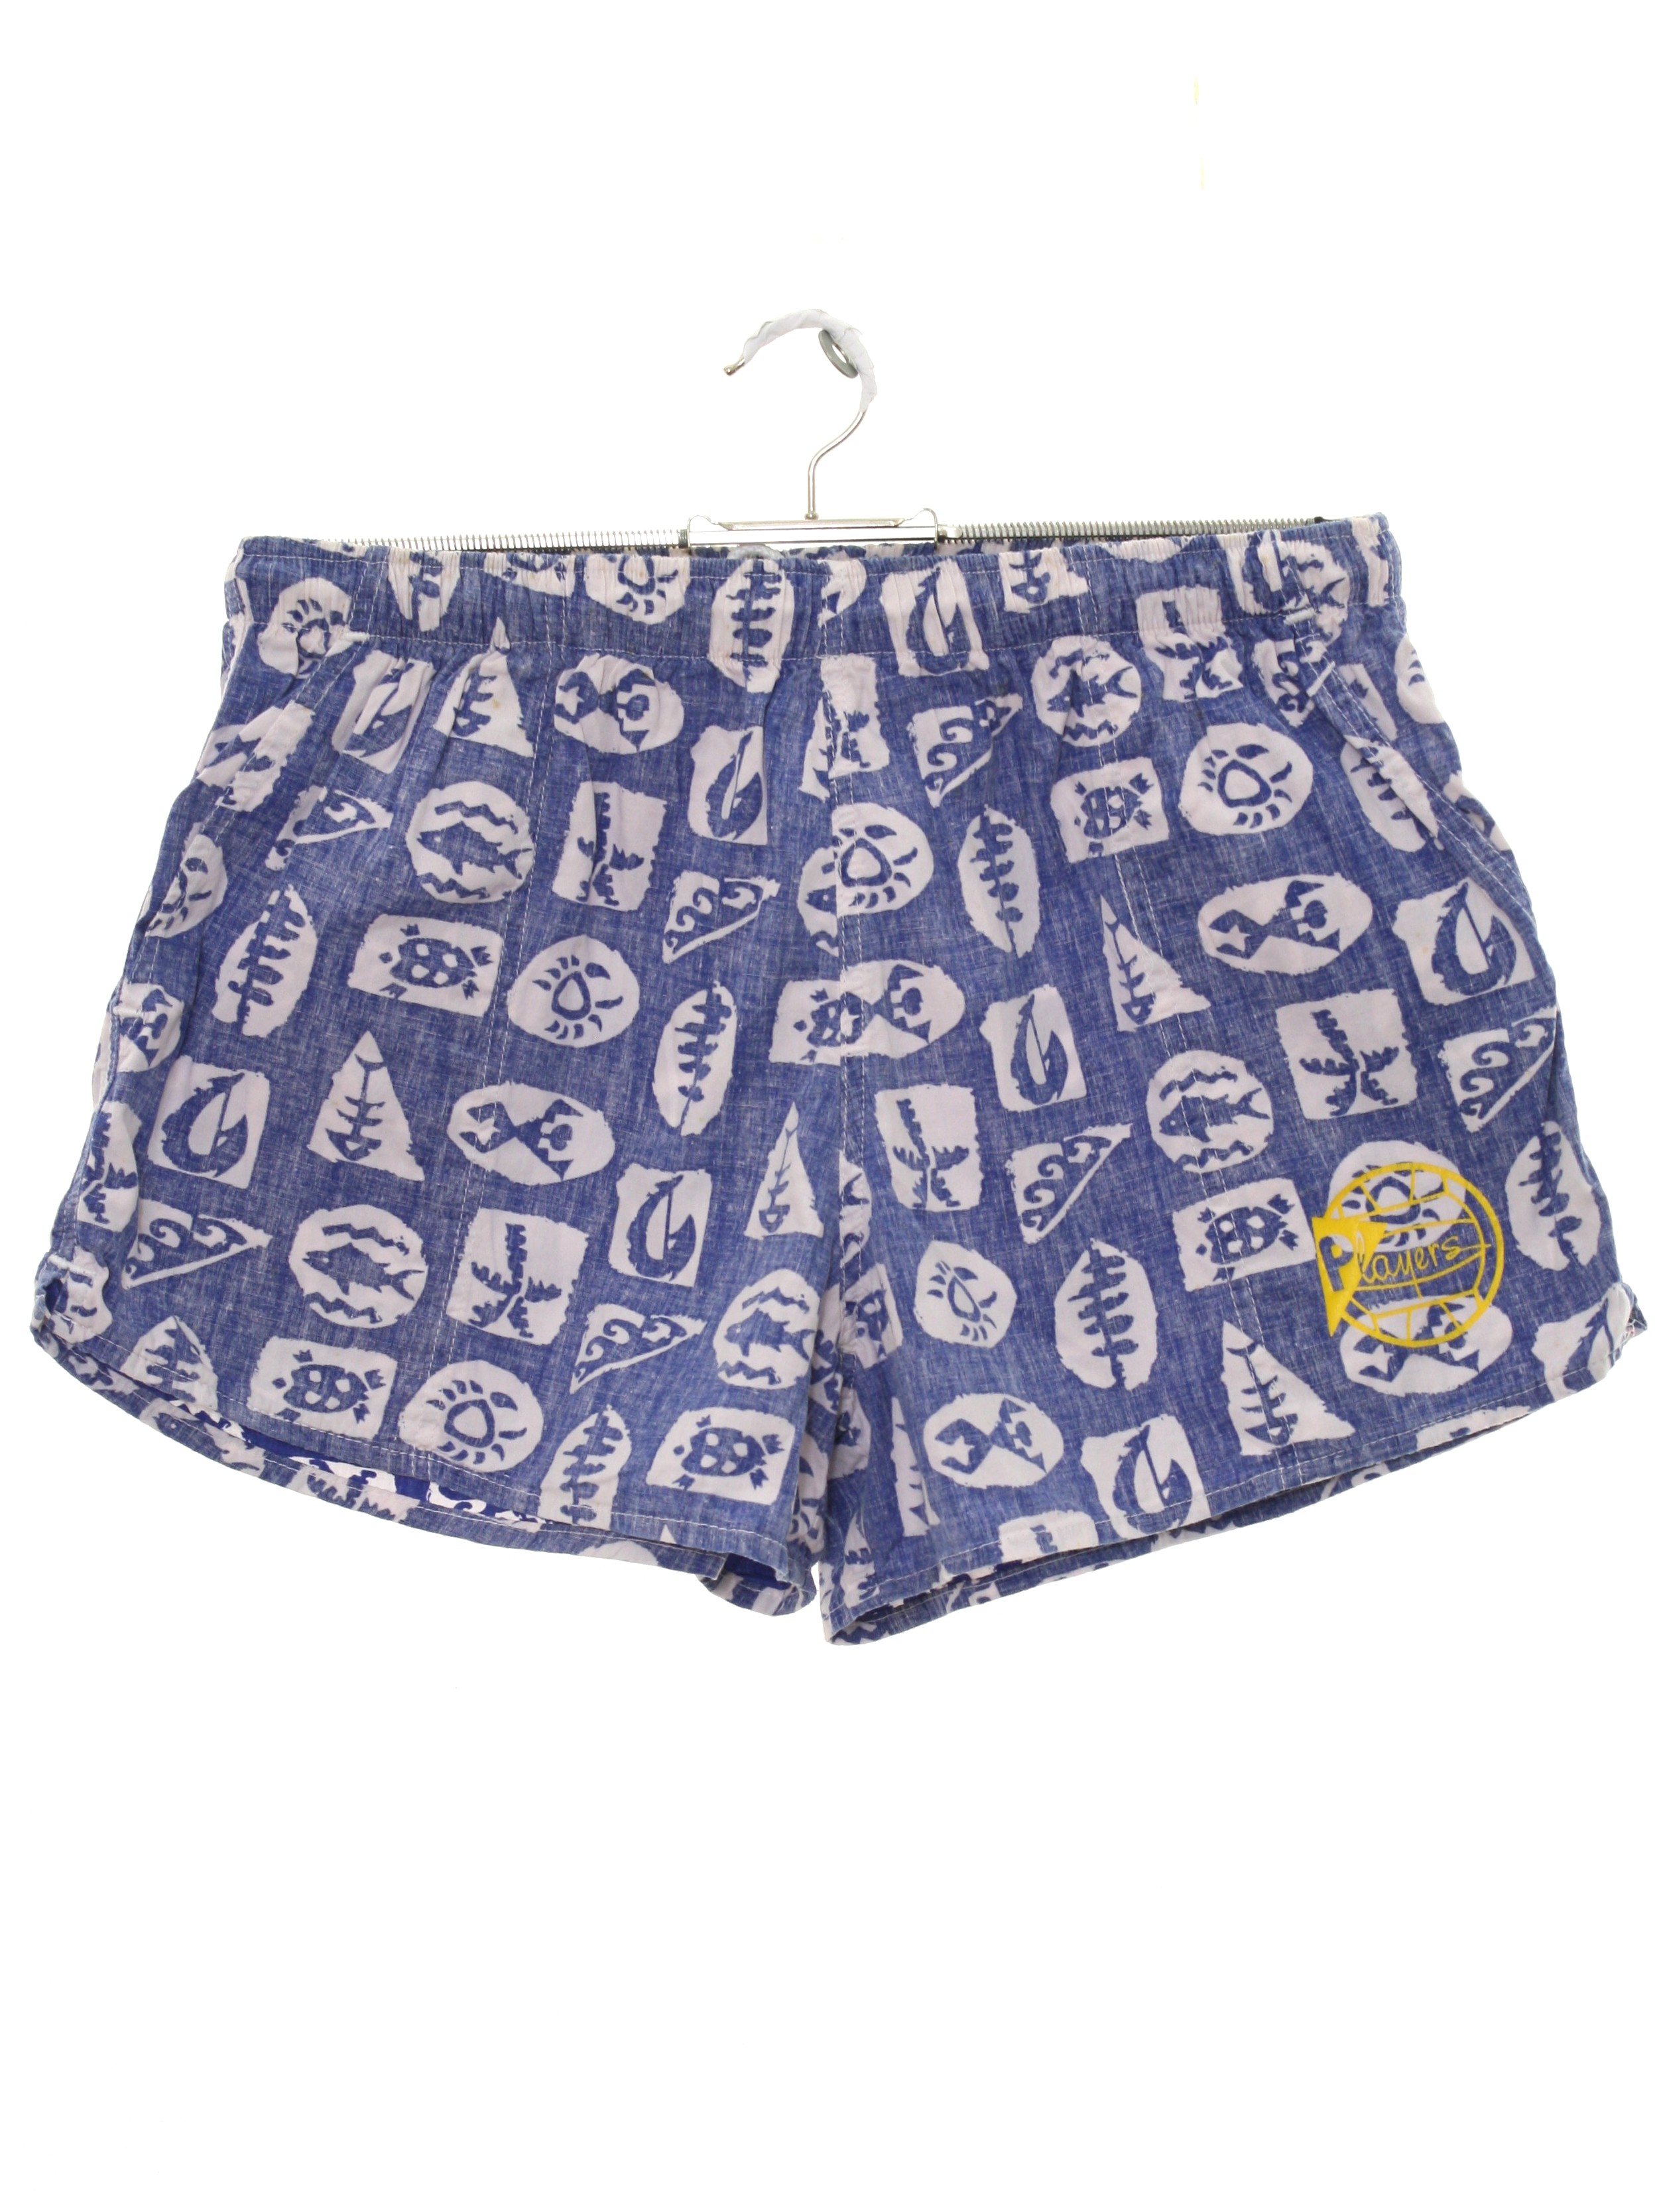 Vintage 80s Shorts: 80s -Made in USA- Unisex reverse print navy blue ...